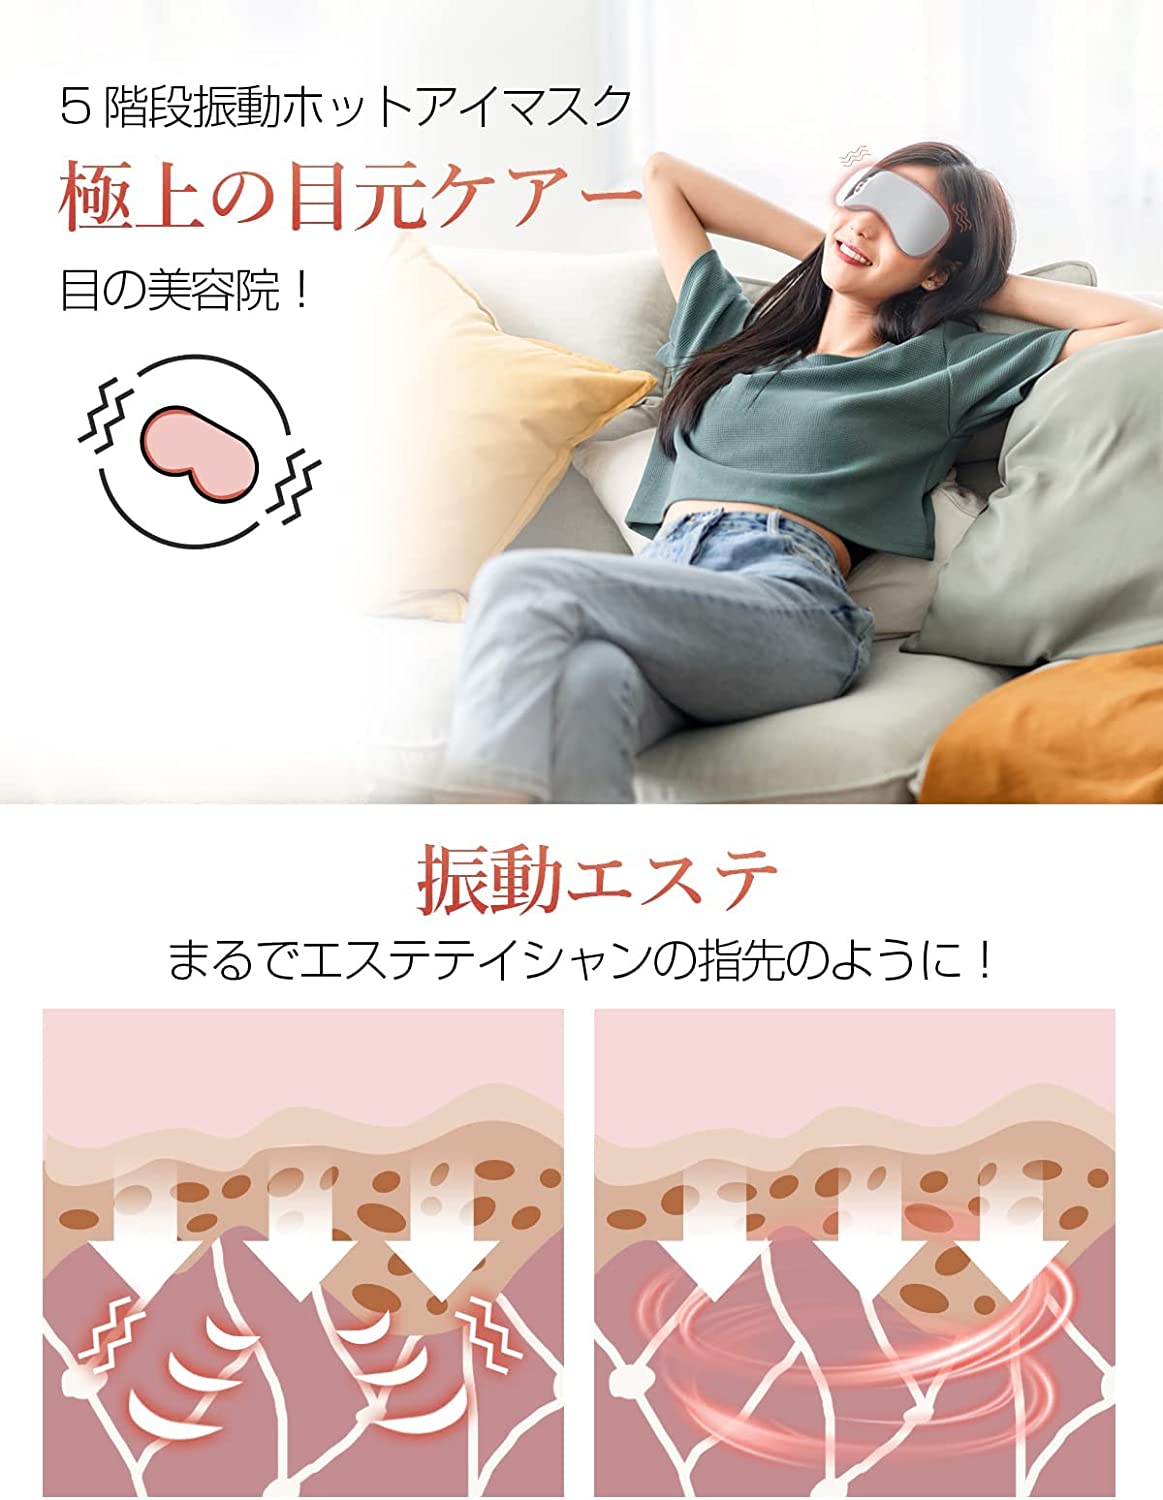  hot eye mask USB rechargeable cordless eyes origin Esthe newest I warmer shade .. goods timer function present gift Japanese instructions Valentine's Day 